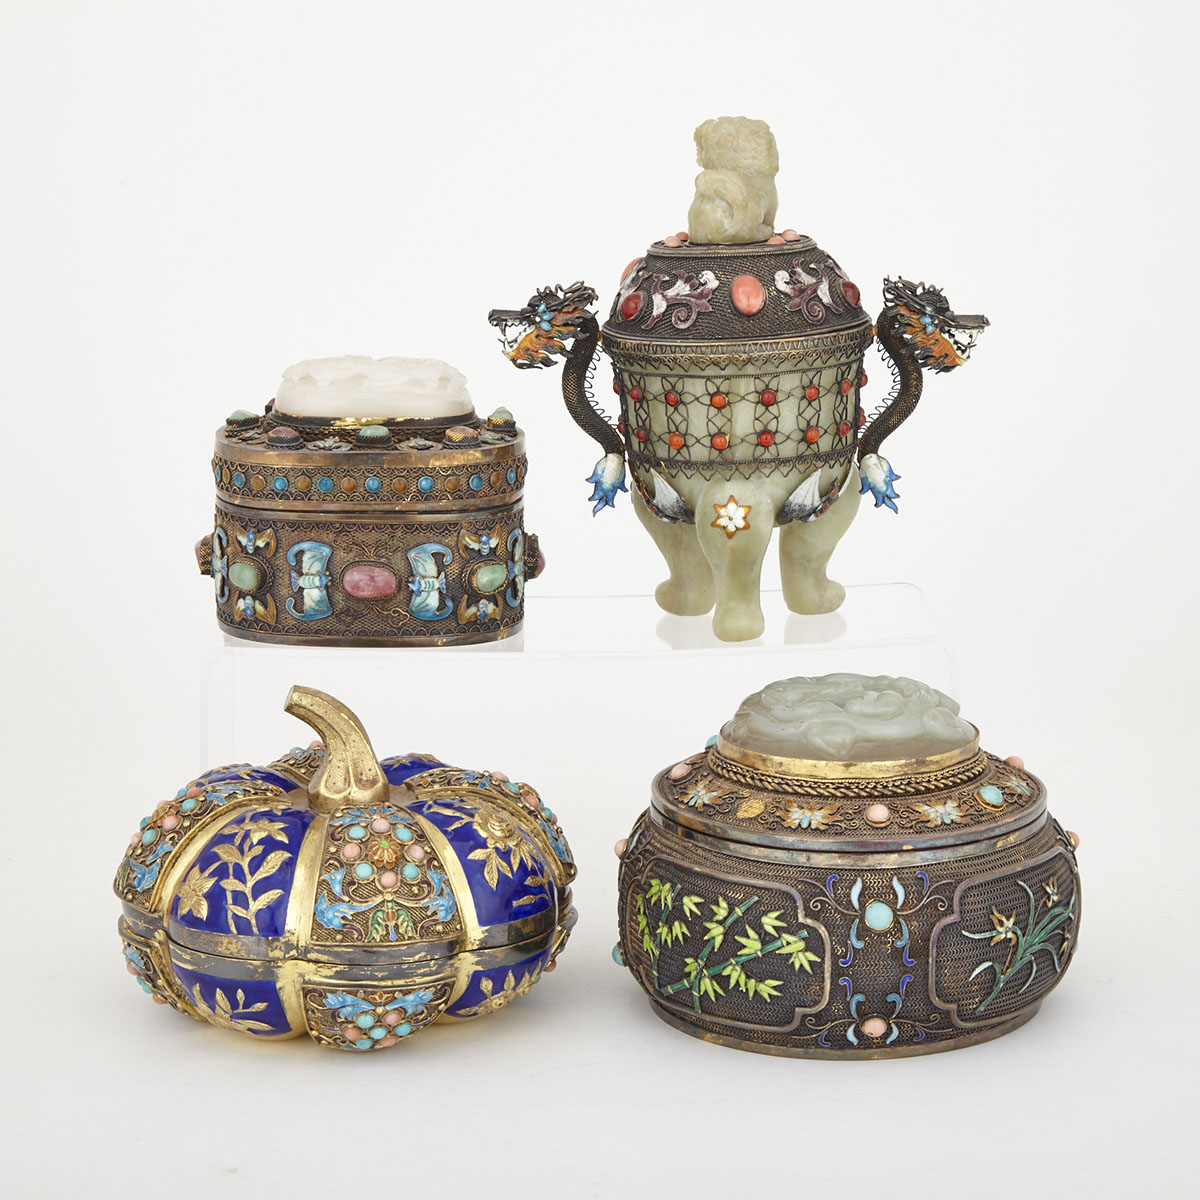 Four Jade Inlaid Boxes, Early 20th Century